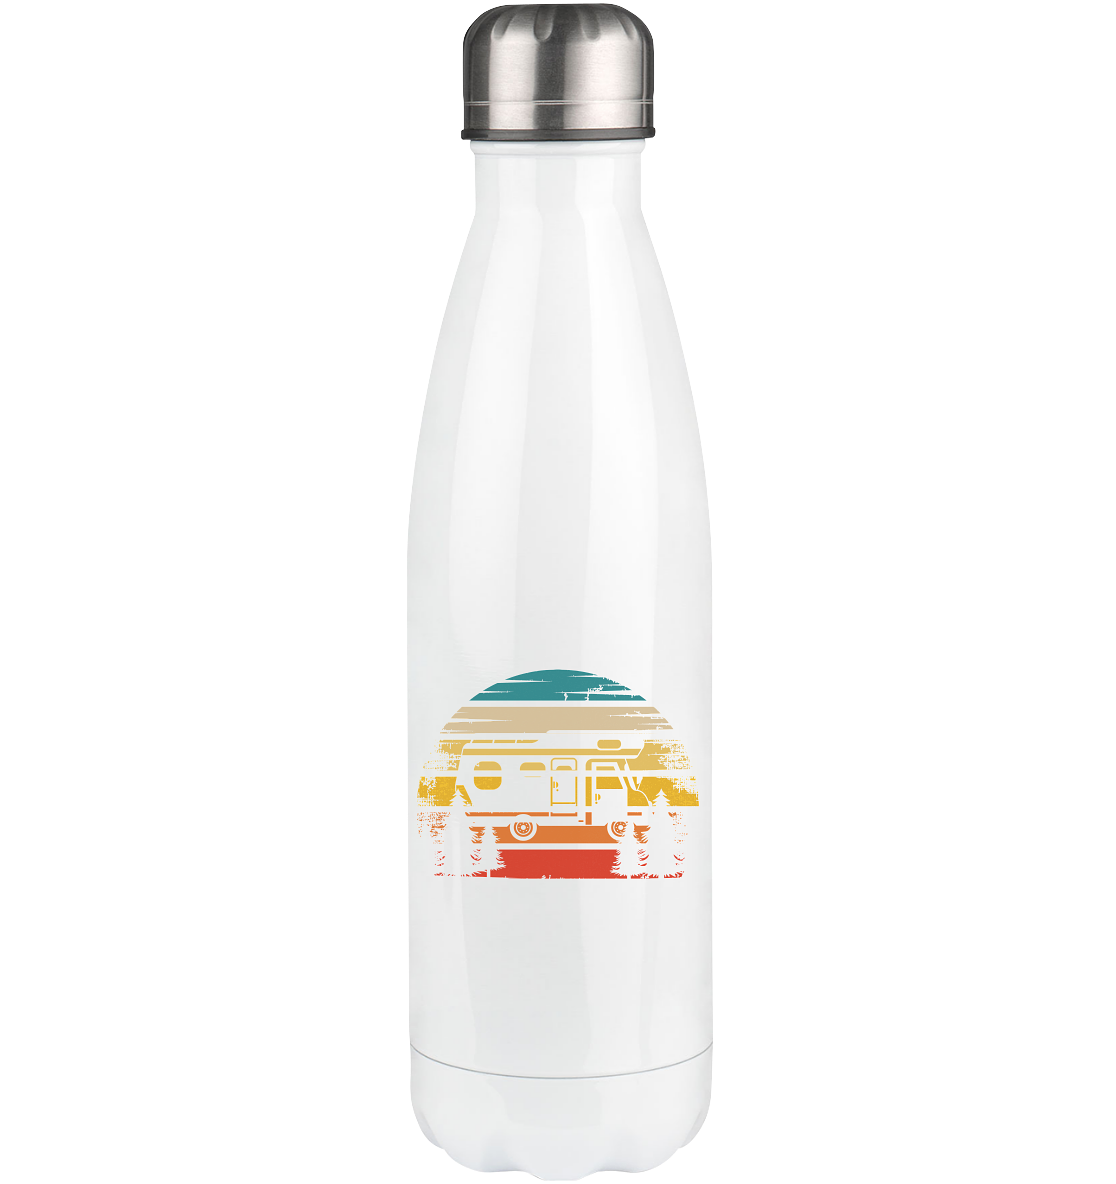 Retro Sun and Camping - Edelstahl Thermosflasche camping 500ml